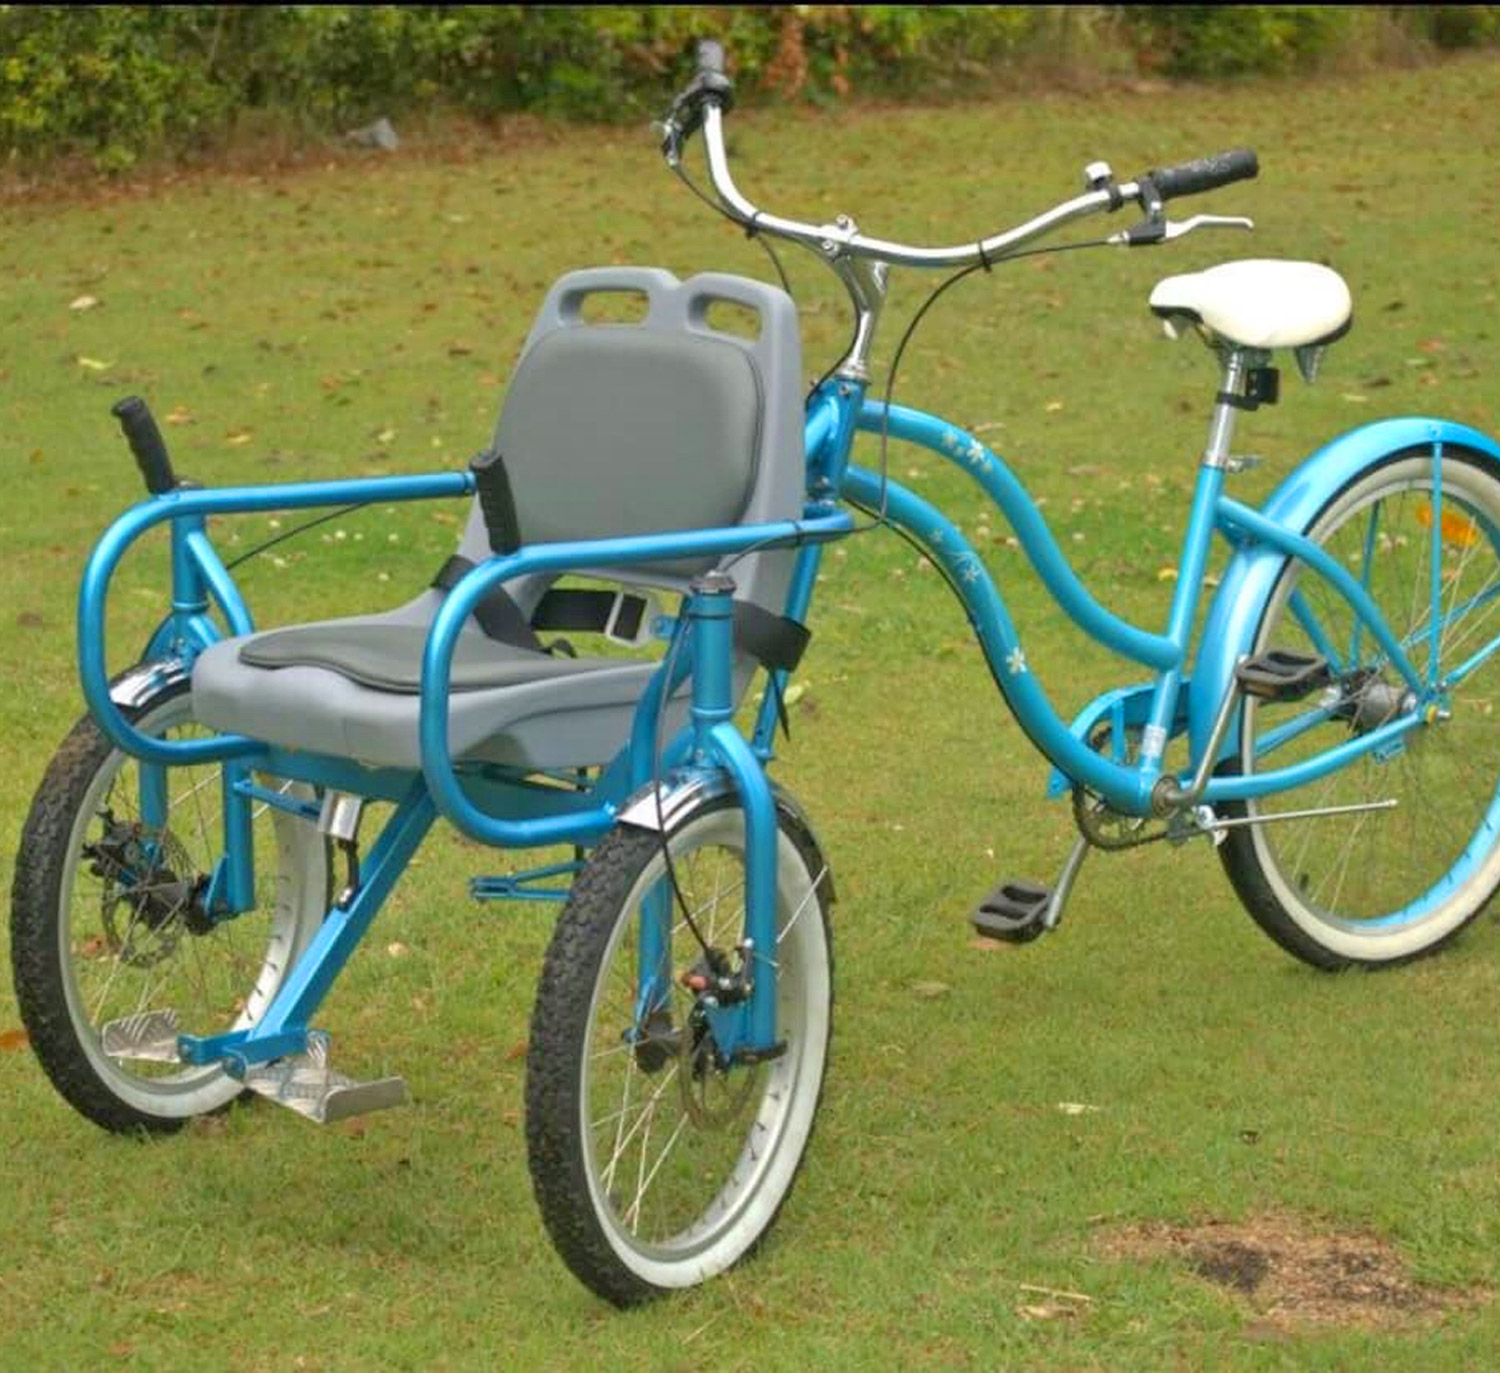 bike for disabled person